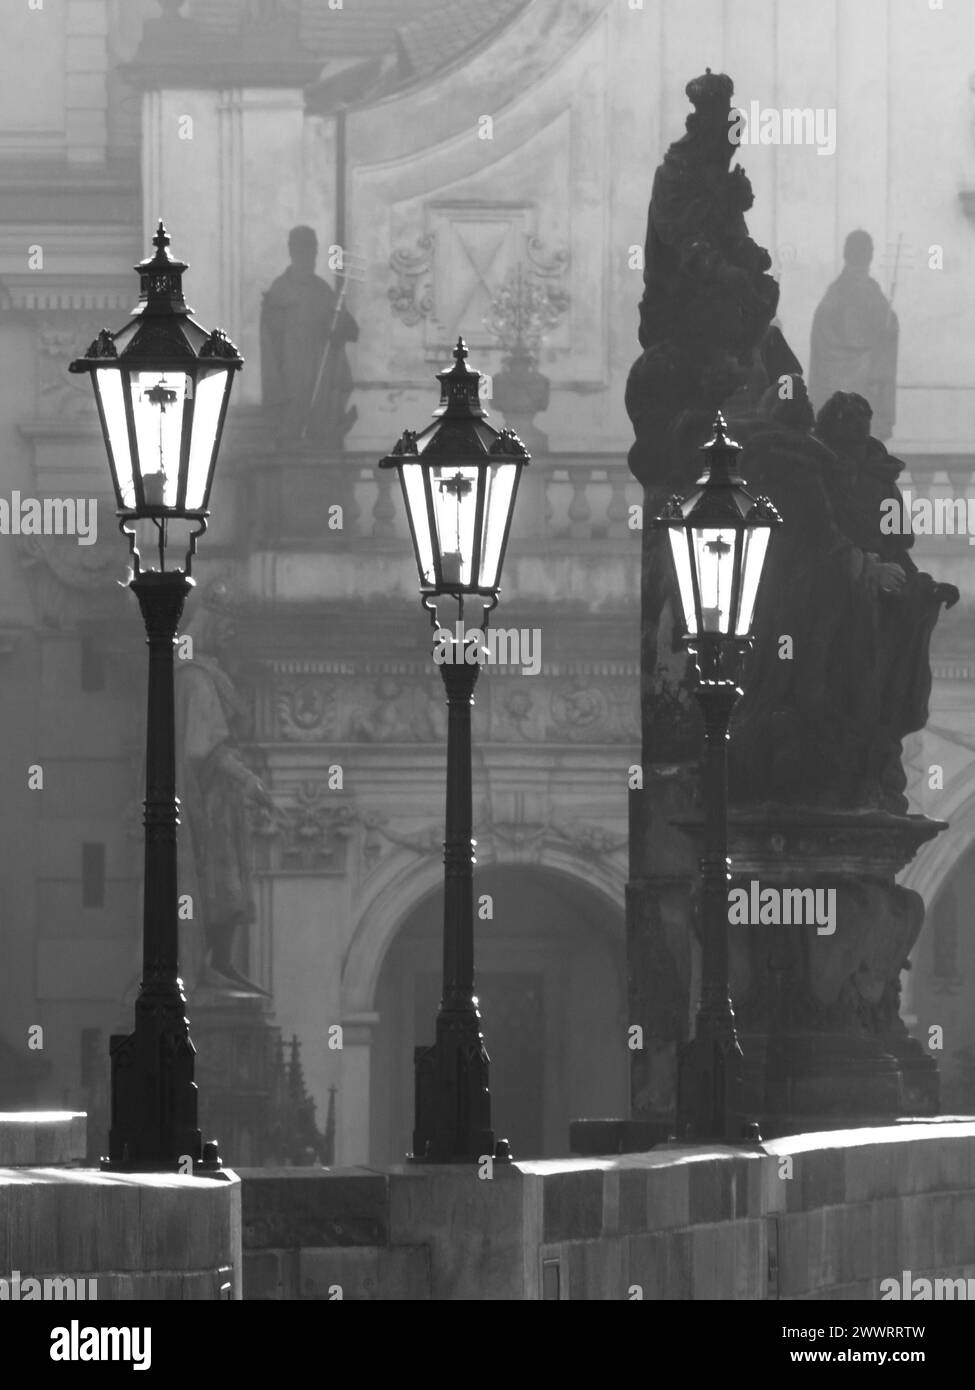 Street lamps on Charles bridge illuminated by morning sun and dark silhouettes of statues, Prague, Czech Republic. Black and white image. Stock Photo